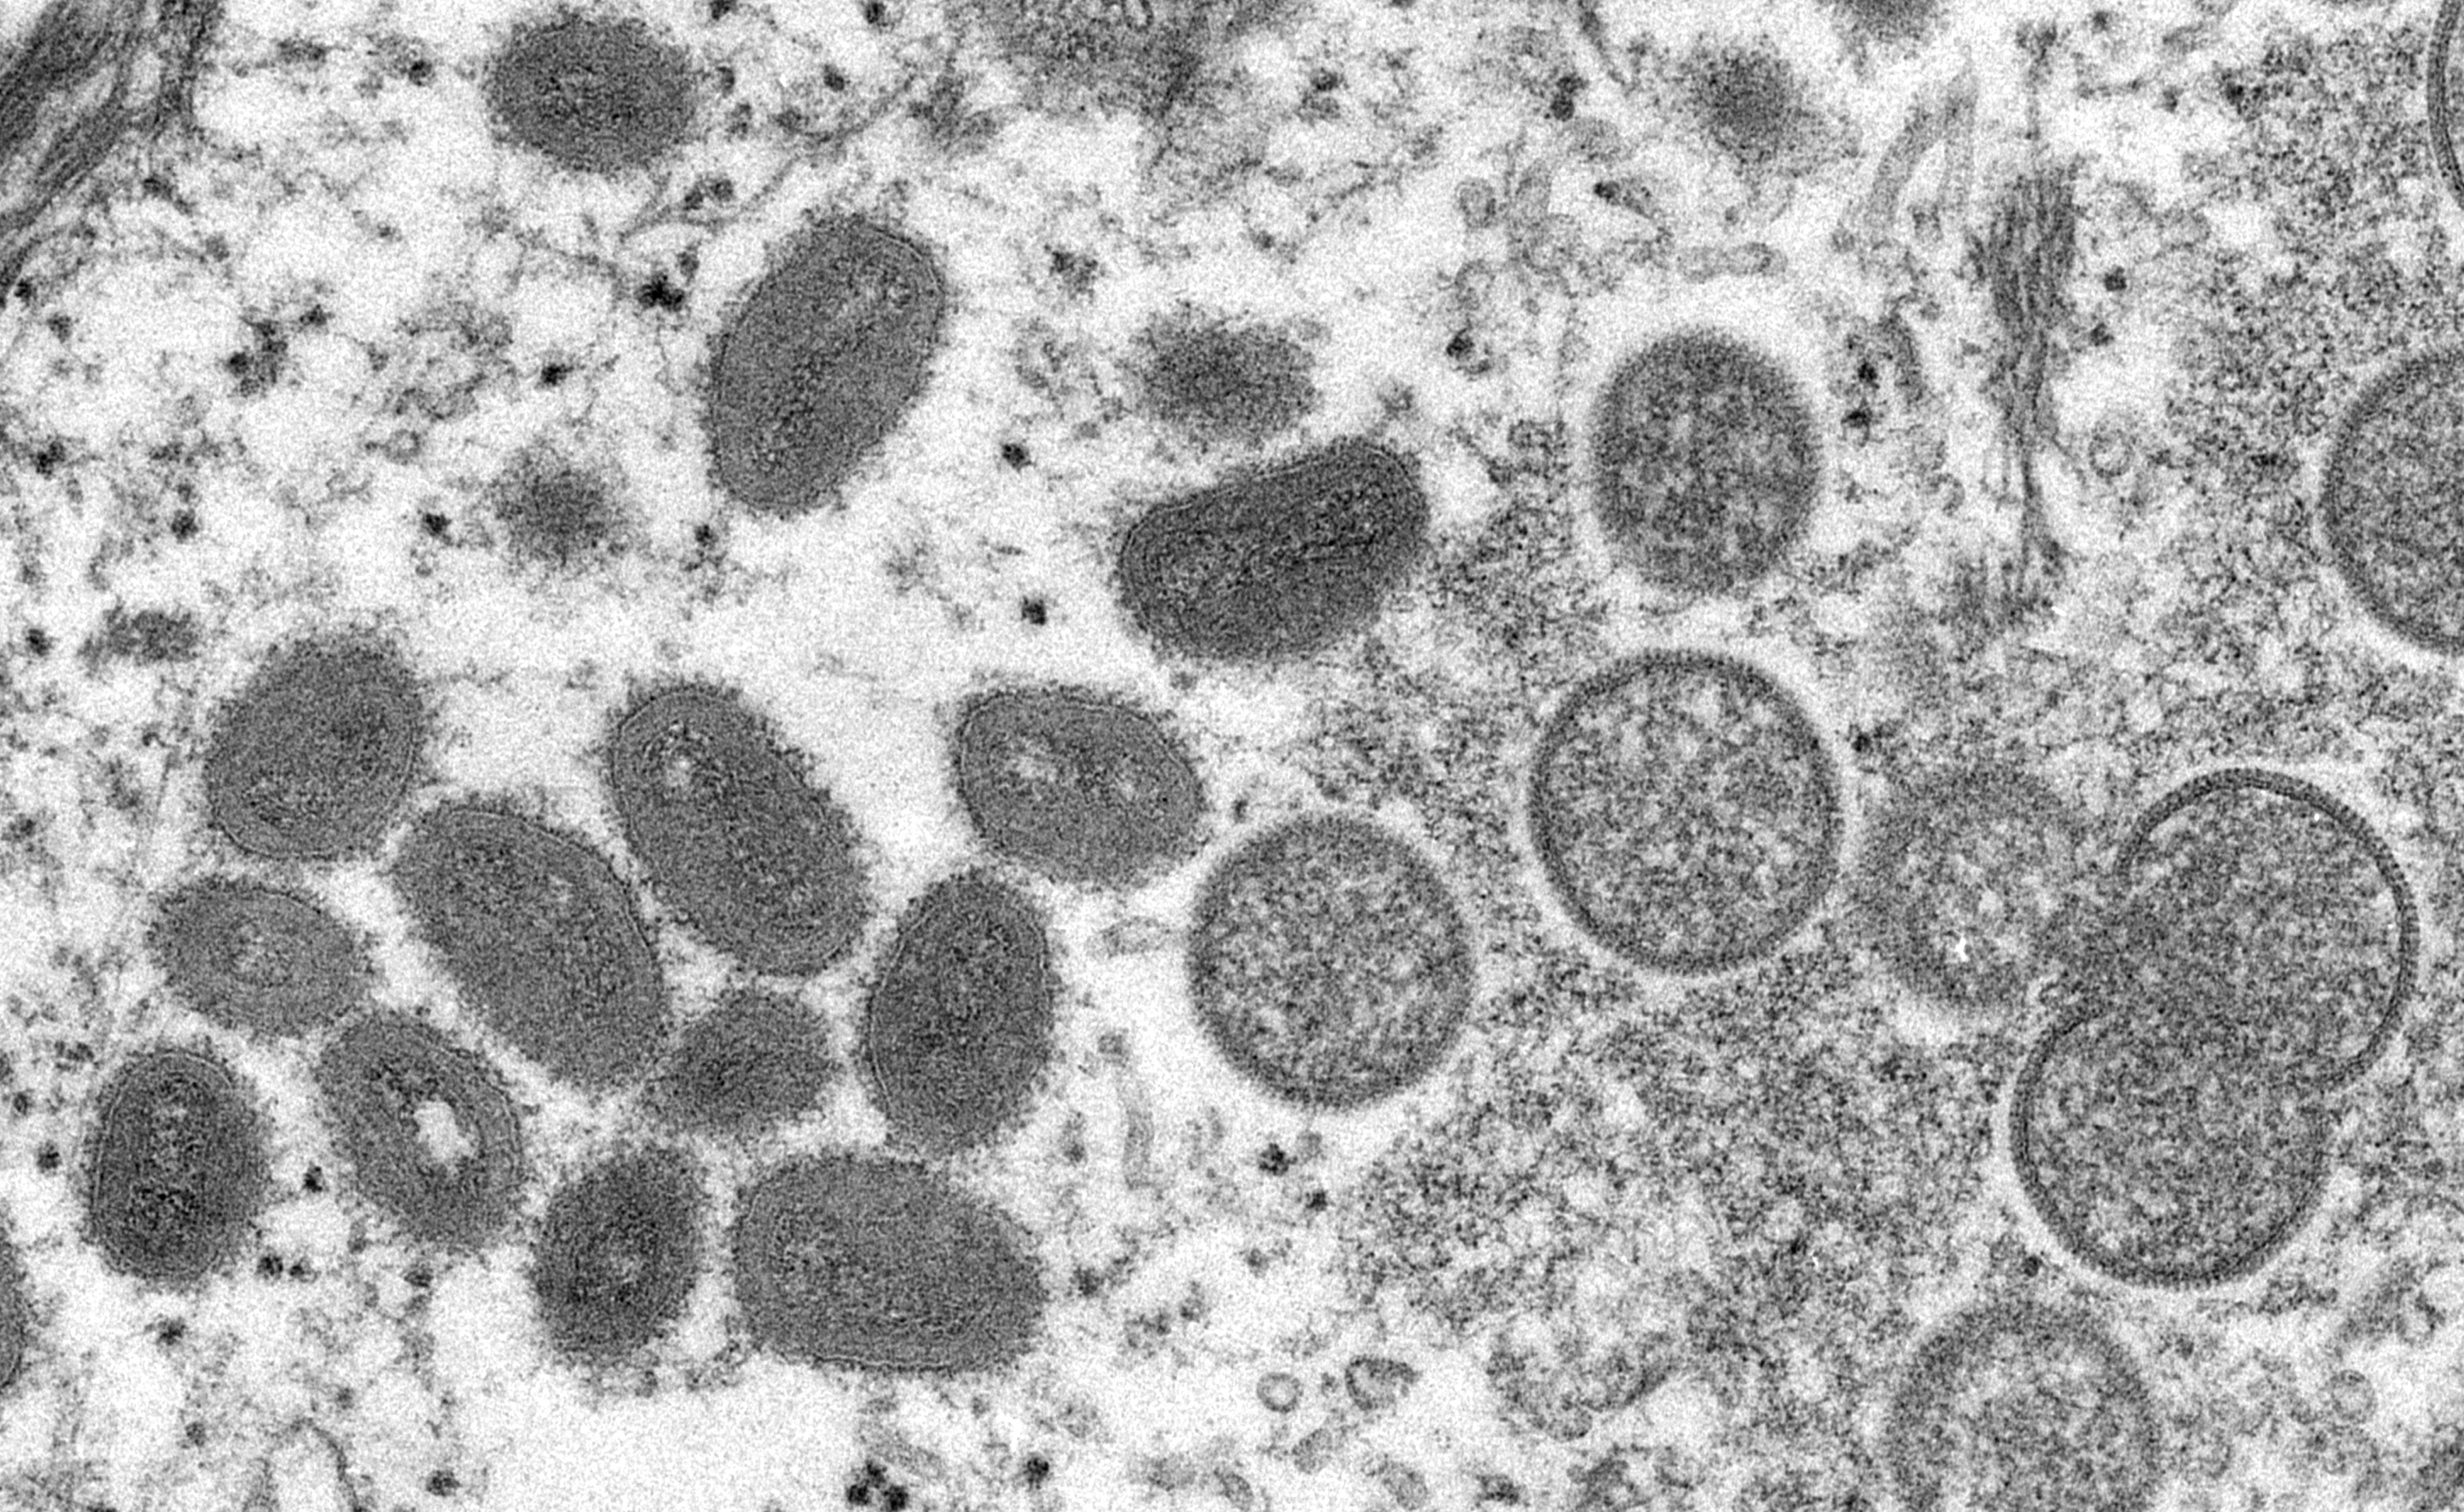 This electron microscopic image depicts monkeypox virus particles obtained from a sample associated with the 2003 prairie dog outbreak. On the left are mature, oval-shaped particles. On the right are crescents and spherical particles of immature virions.  Courtesy of CDC/Cynthia Goldsmith.